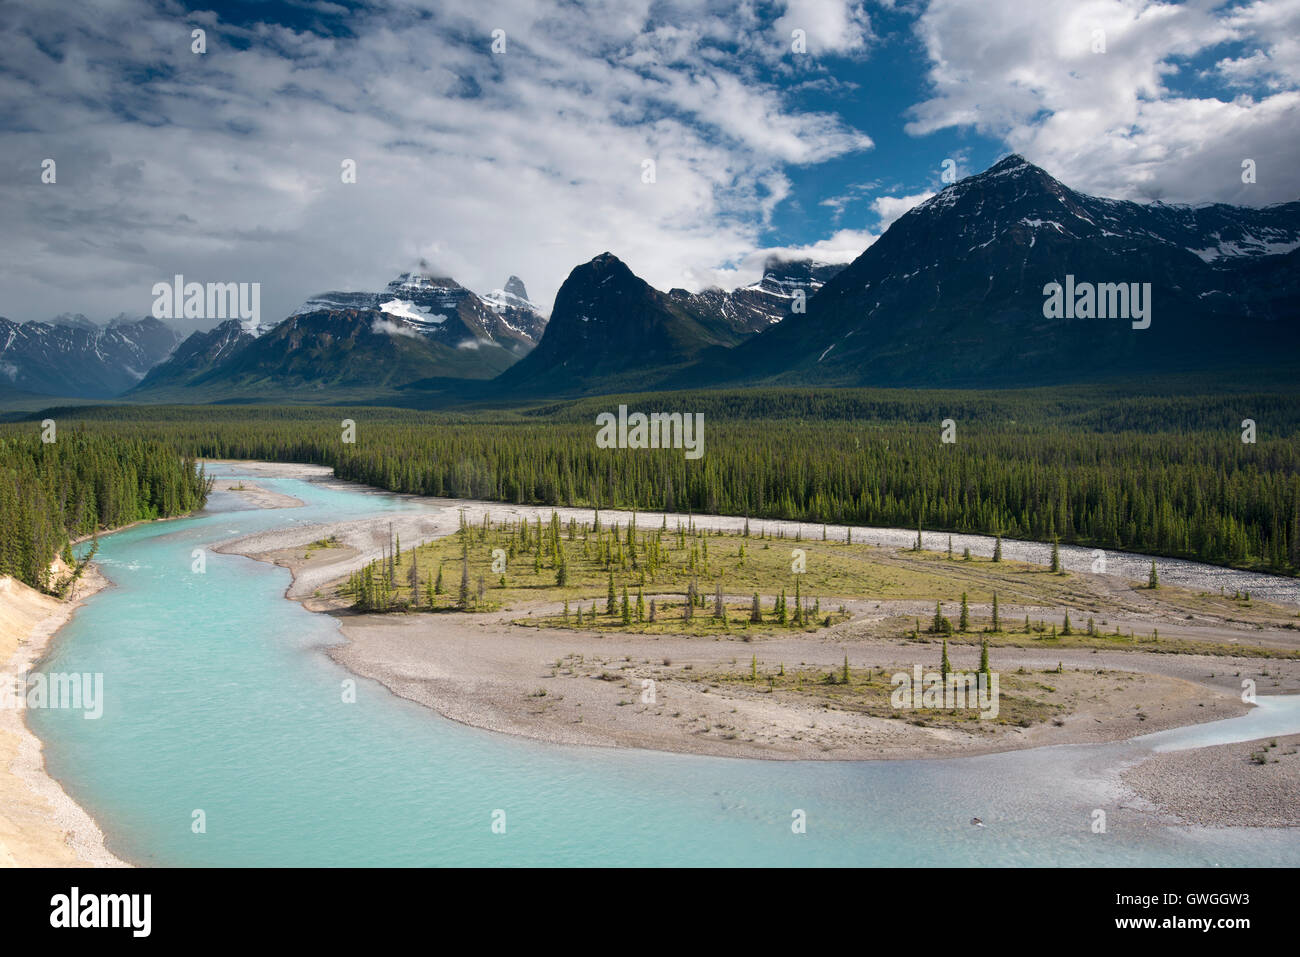 Athabasca River on the Icefields Parkway, Jasper National Park, Alberta, Canada Stock Photo